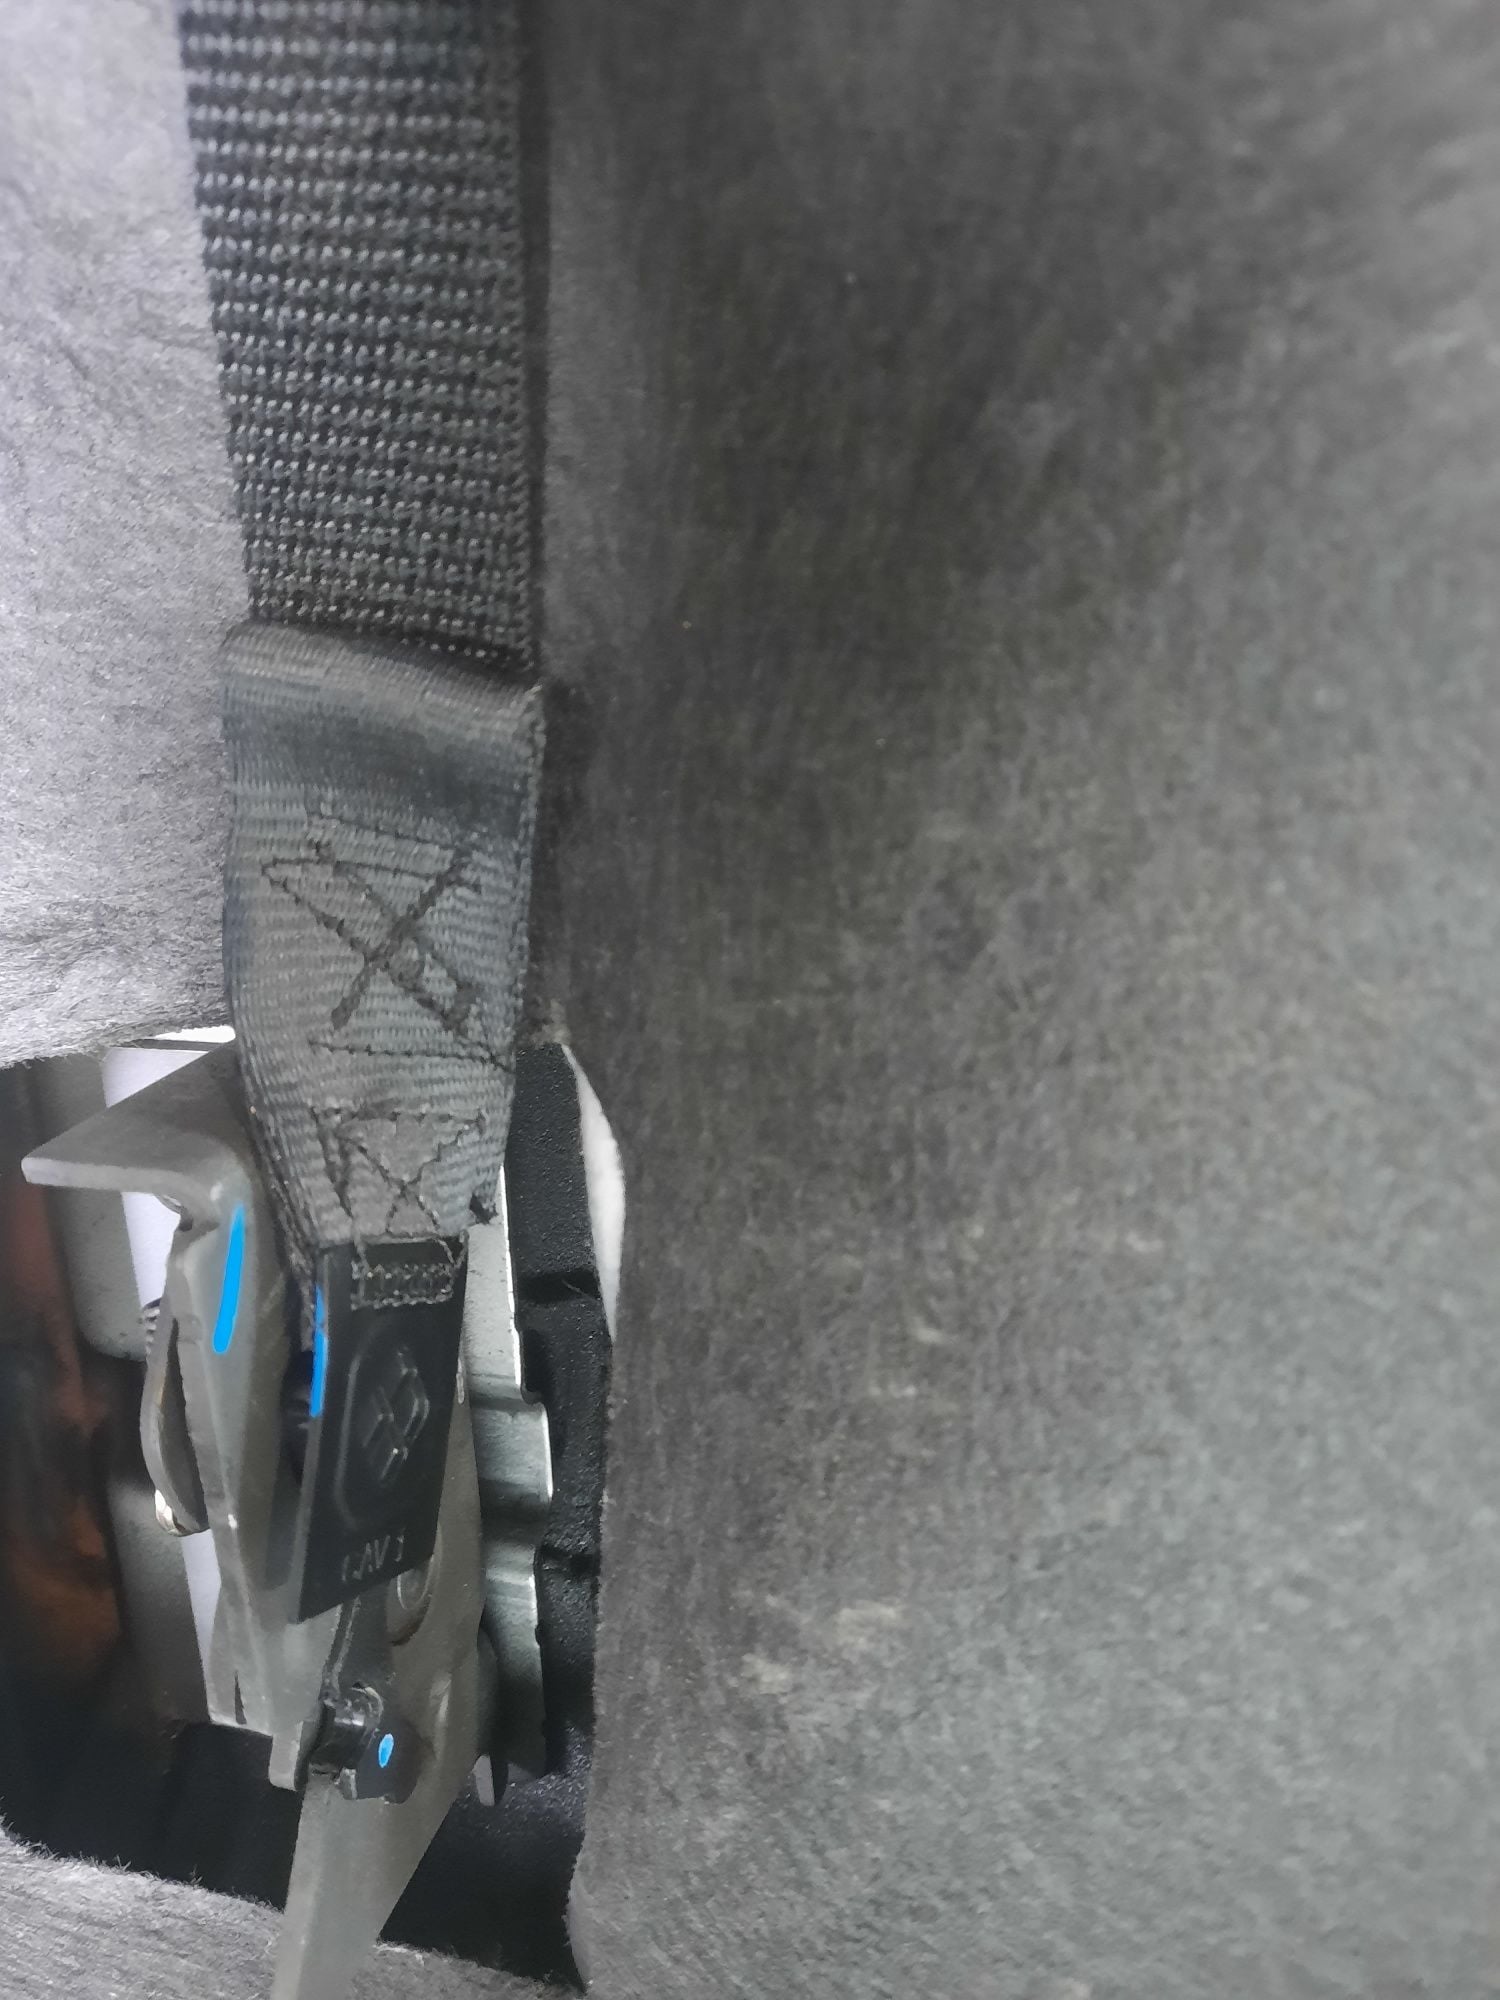 Back seat latch: My solution - Ford Truck Enthusiasts Forums